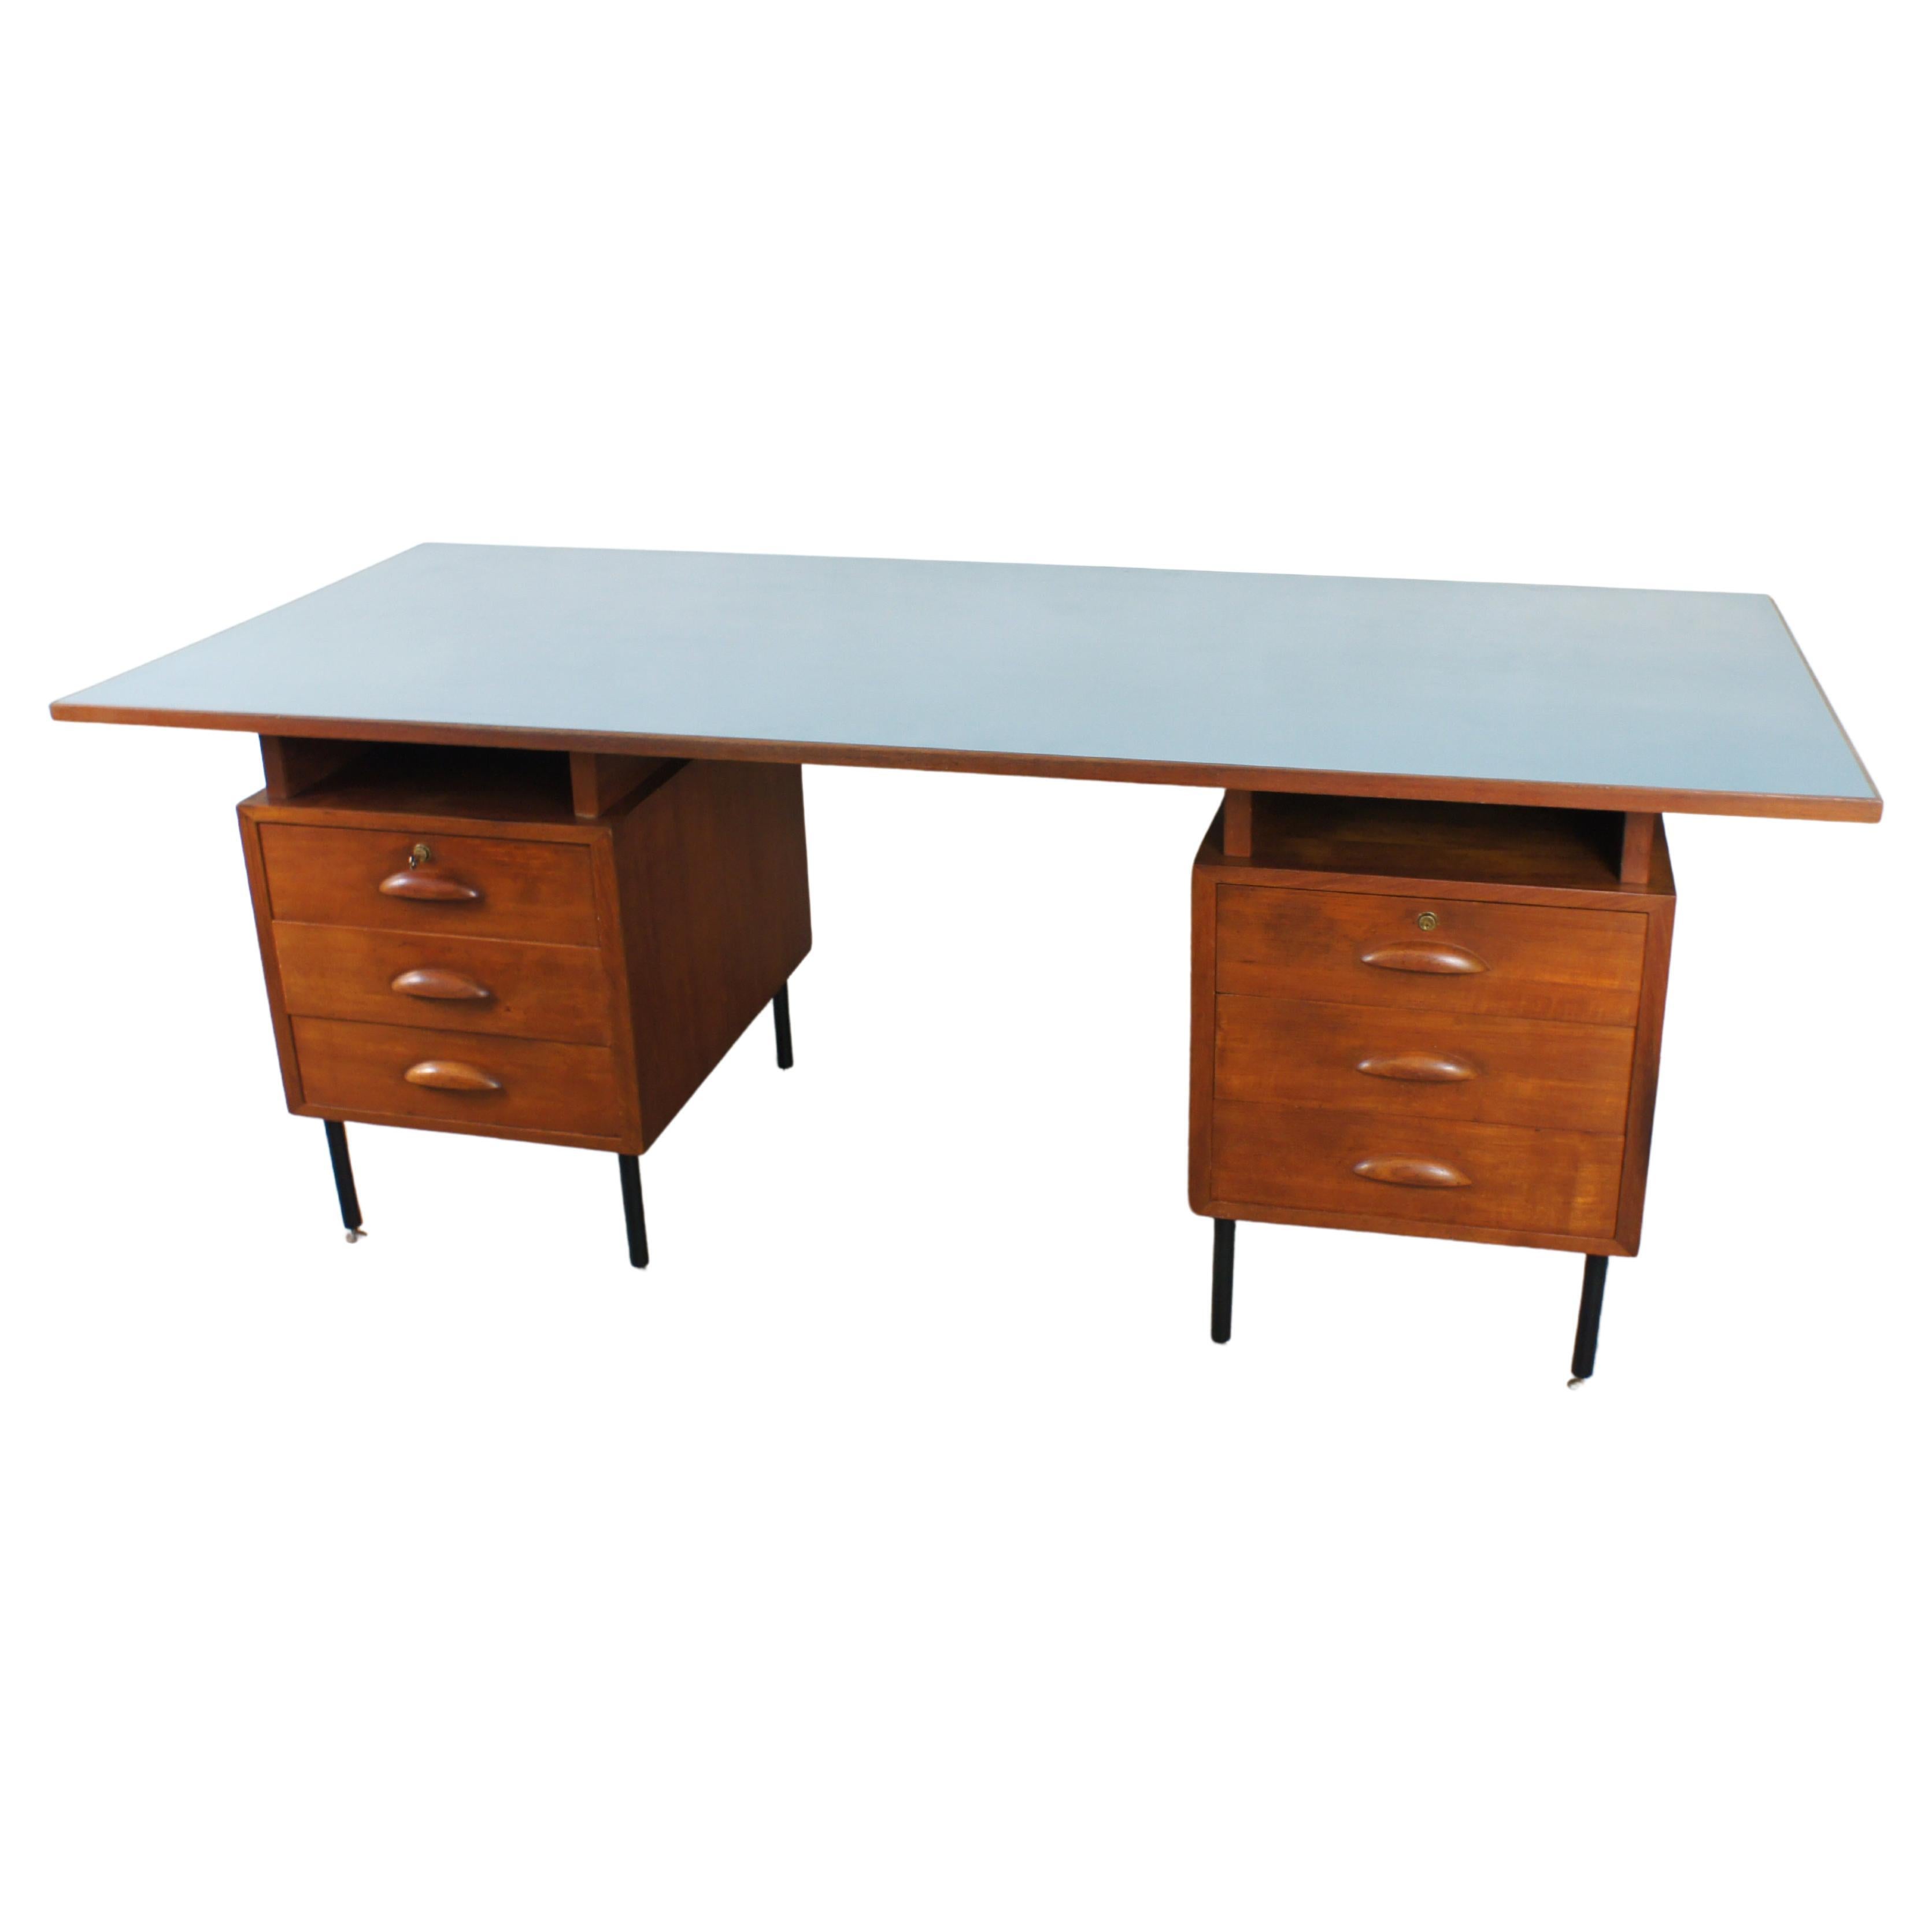 Italian-made executive desk from the 1950s For Sale